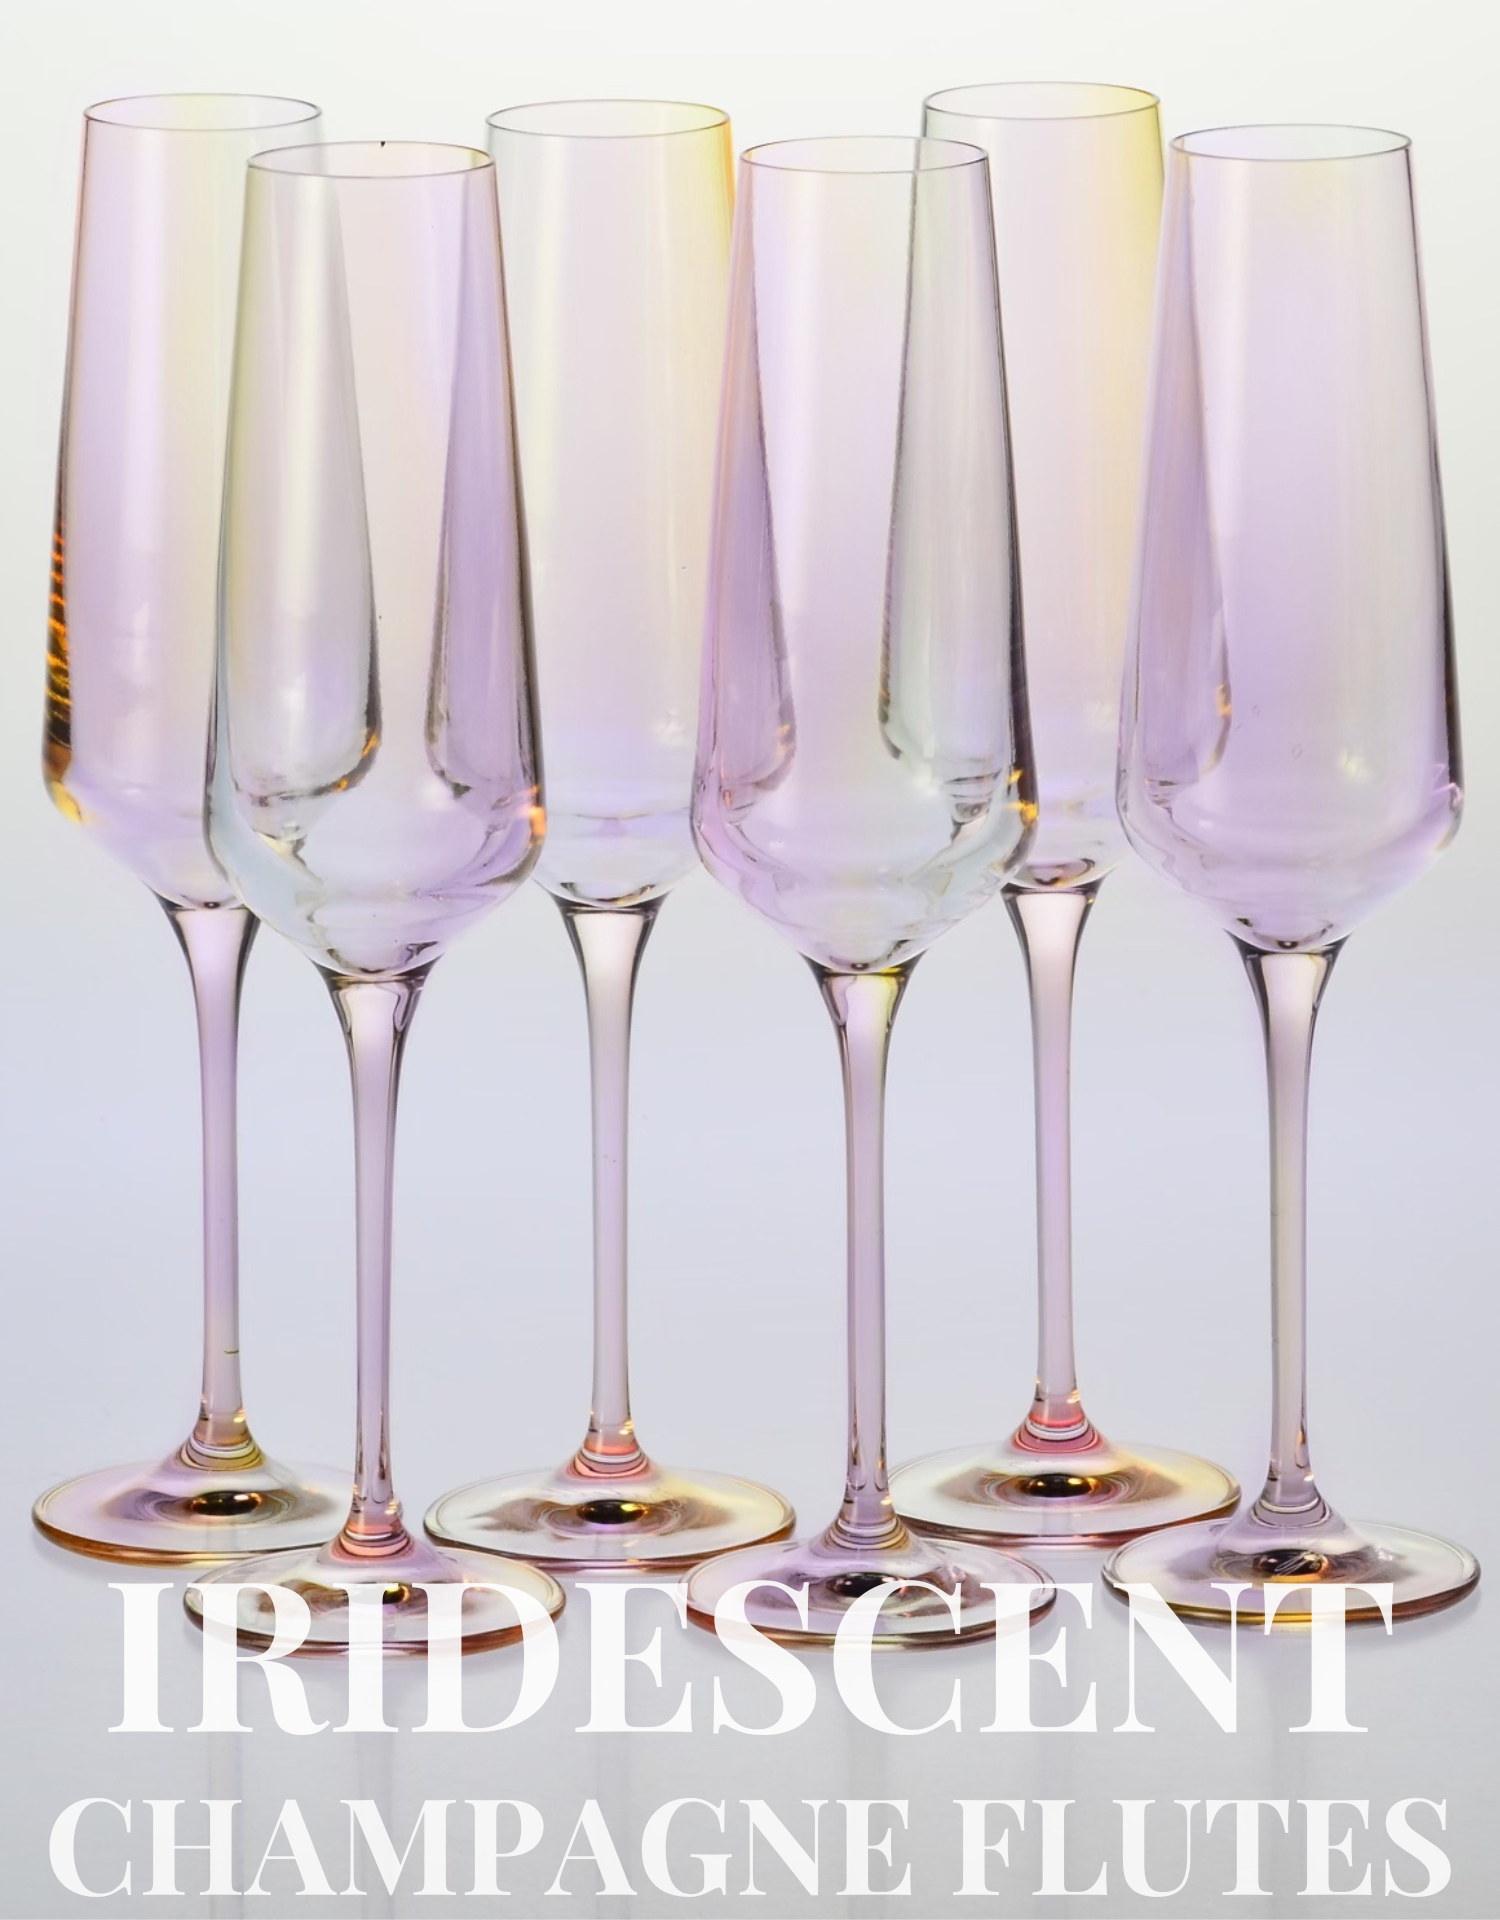 New Iridescent Champagne Flutes + 1 Day Left of Sale